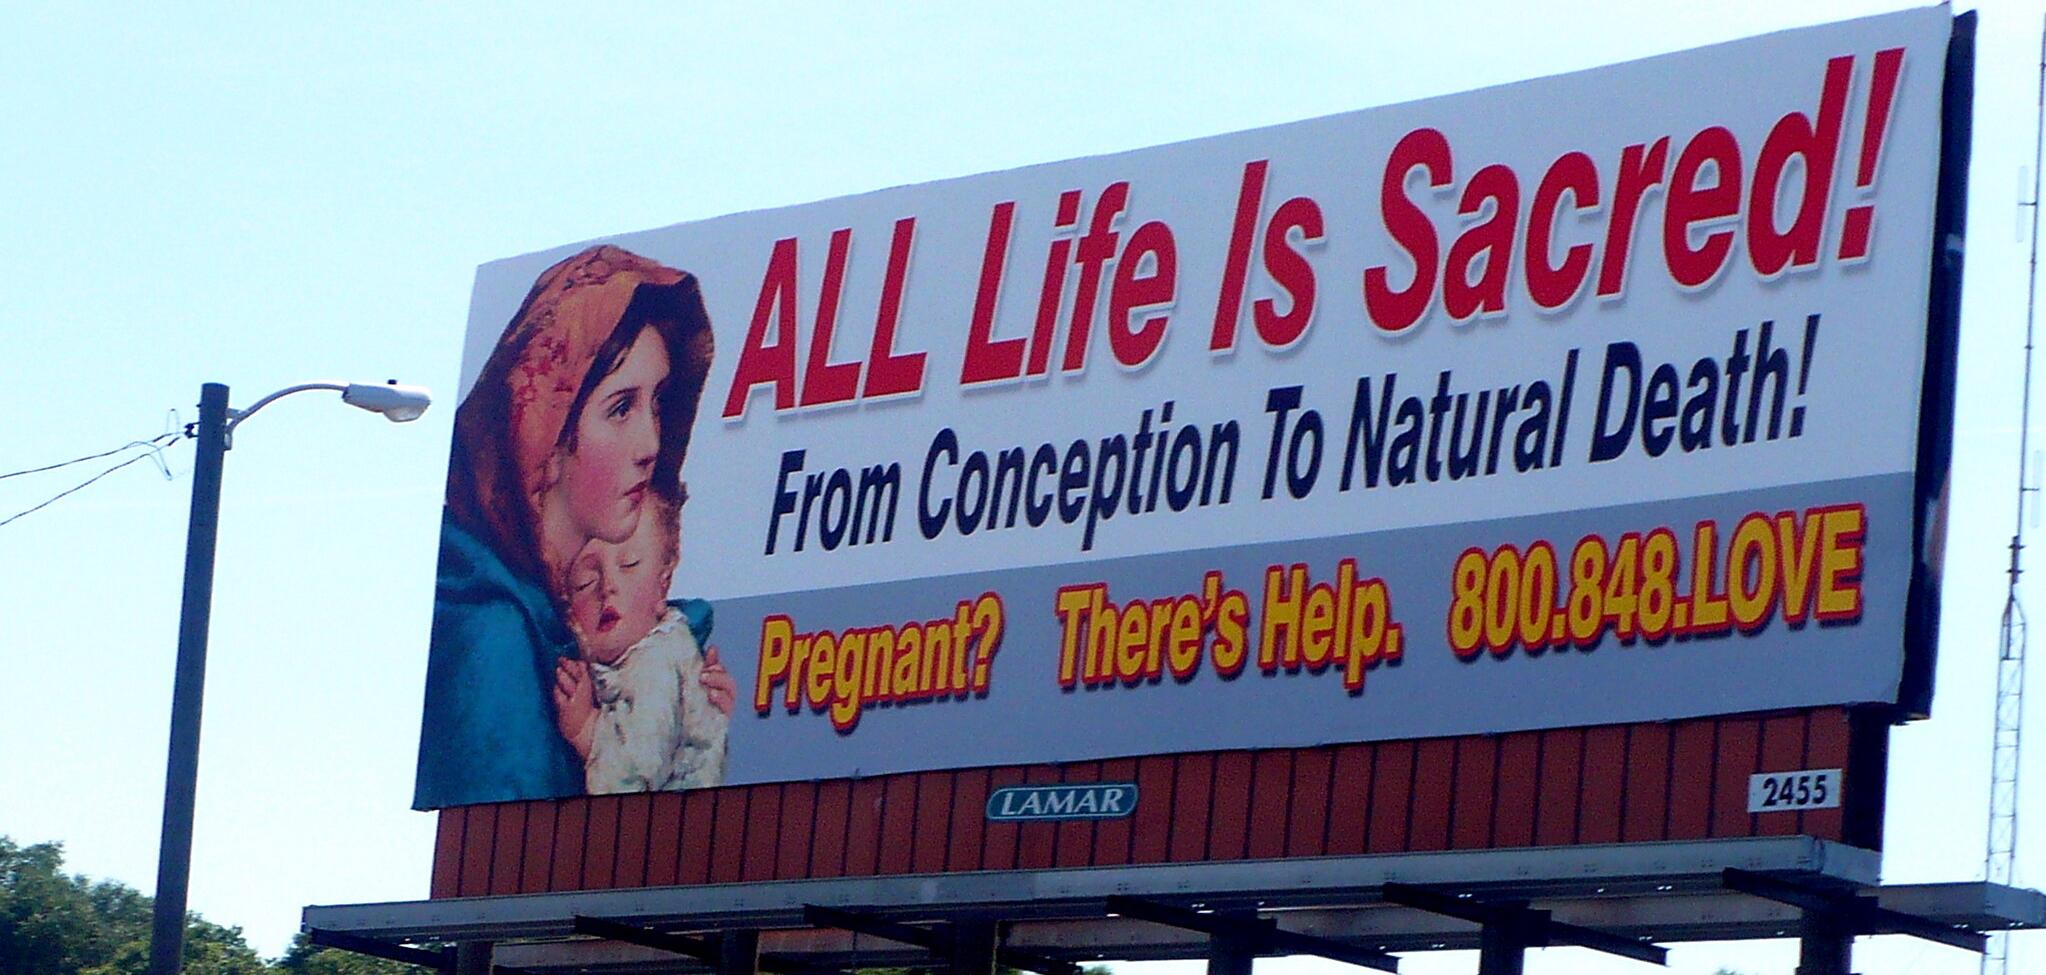 a billboard that says "All life is Sacred! From conception to natural death! Pregnant? There's Help. 800.748.LOVE"